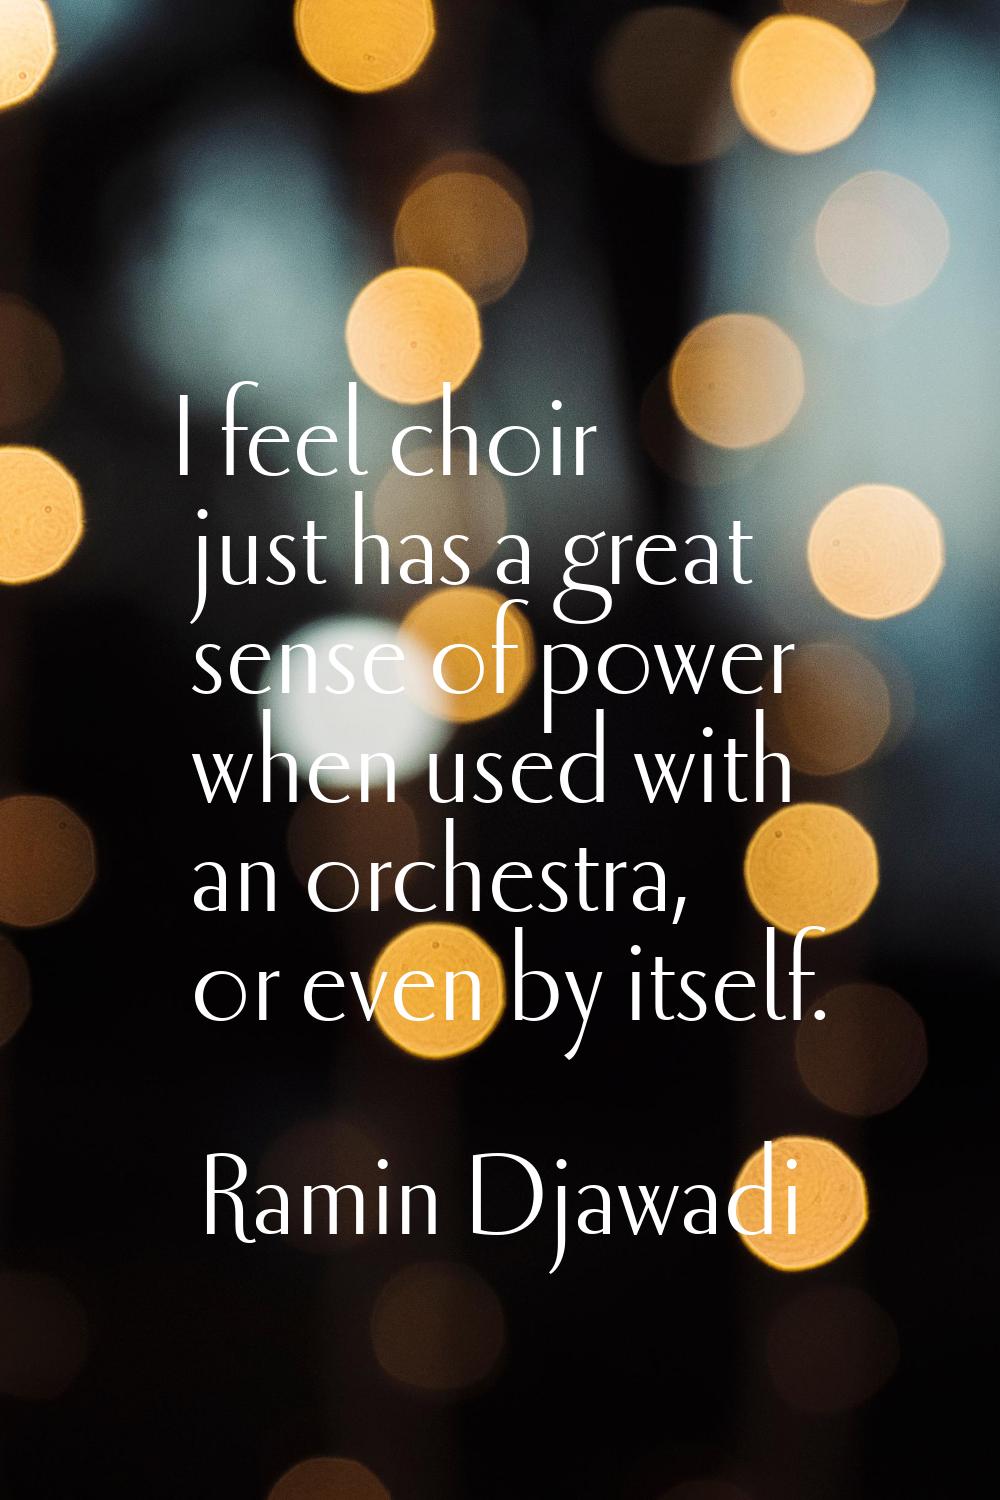 I feel choir just has a great sense of power when used with an orchestra, or even by itself.